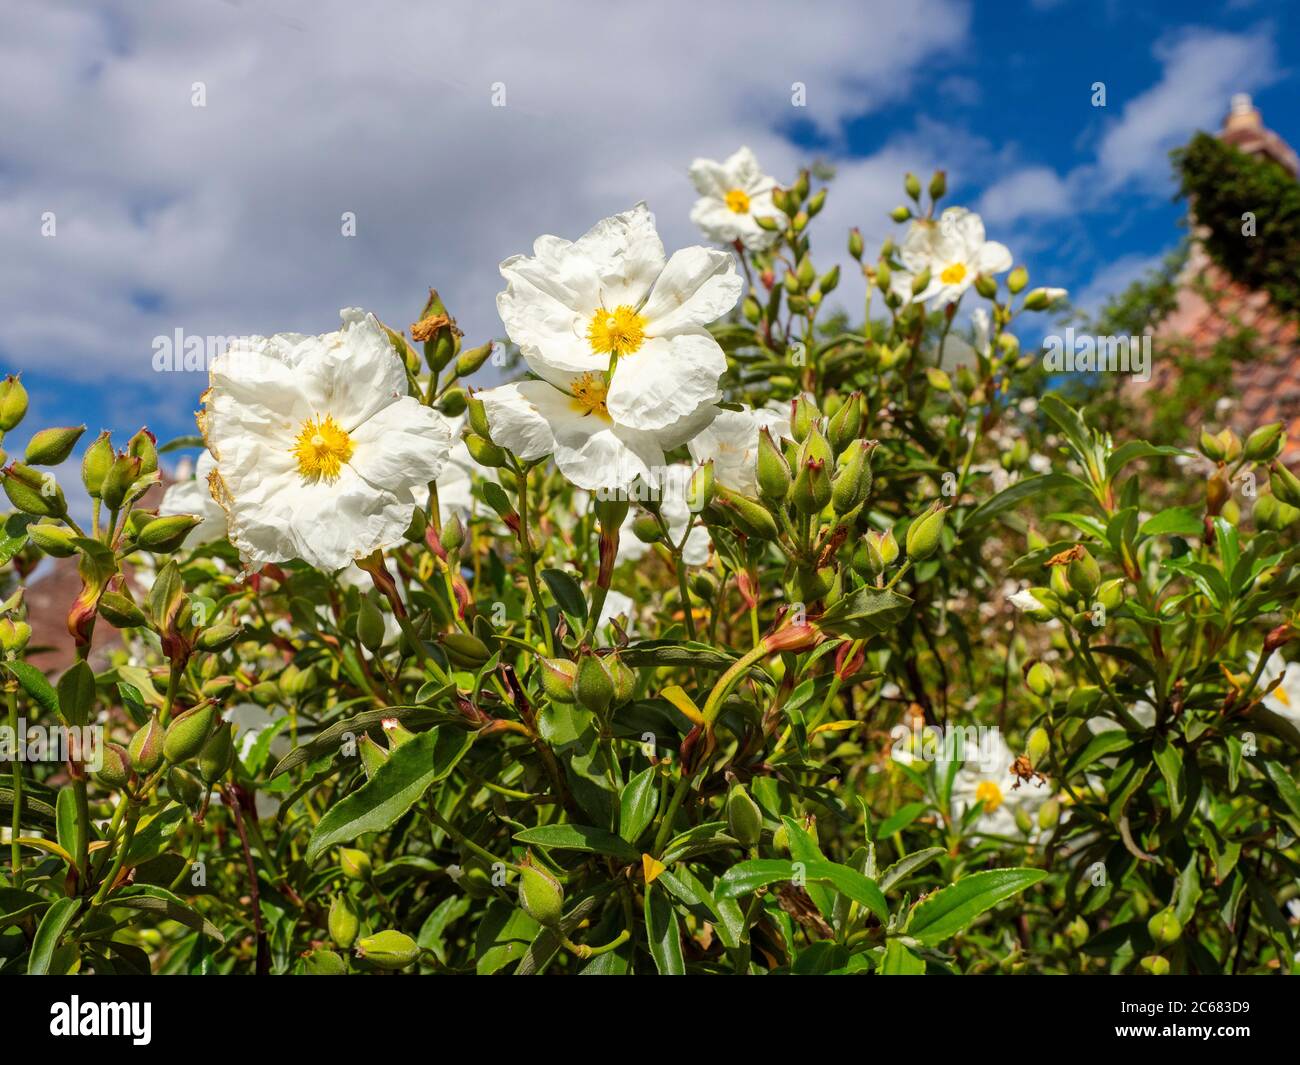 Cistus flowers, a genus of flowering plants in the rockrose family Cistaceae, containing about 20 species. Stock Photo